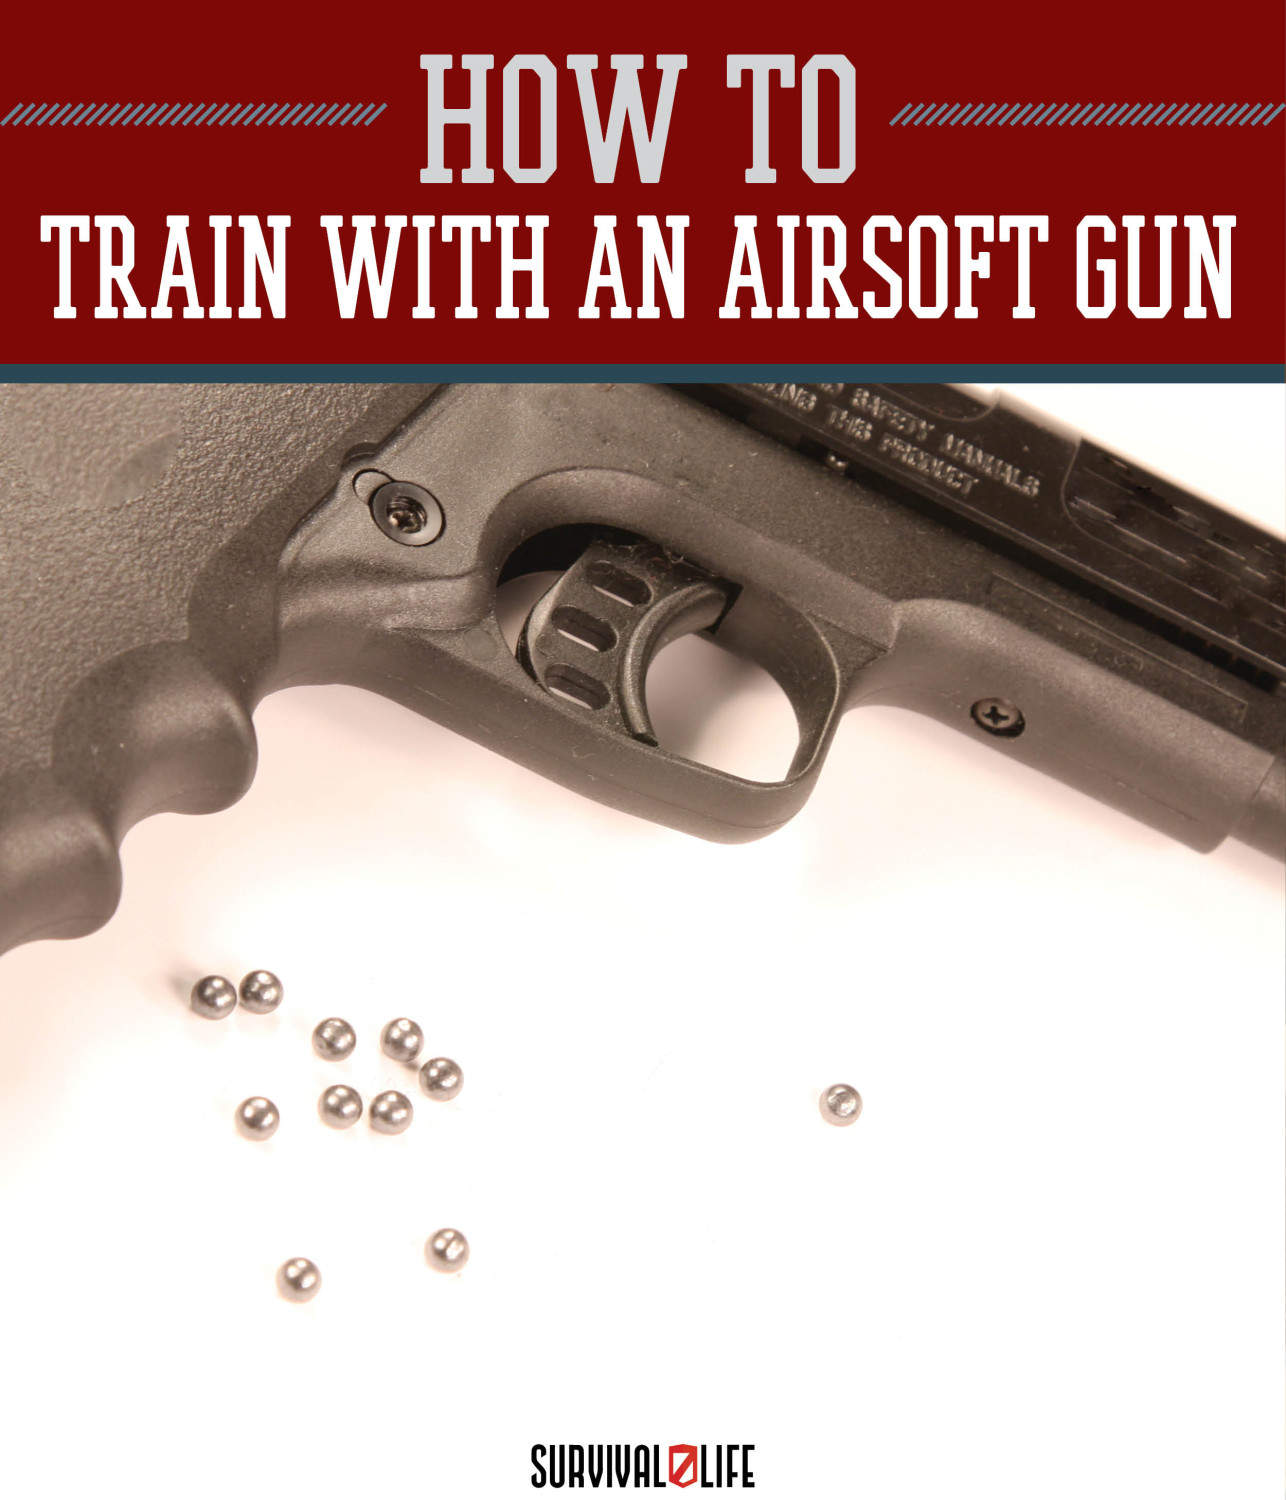 Training with Airsoft Rifles by Survival Life at http://survivallife.com/2015/04/29/airsoft-rifles-training/